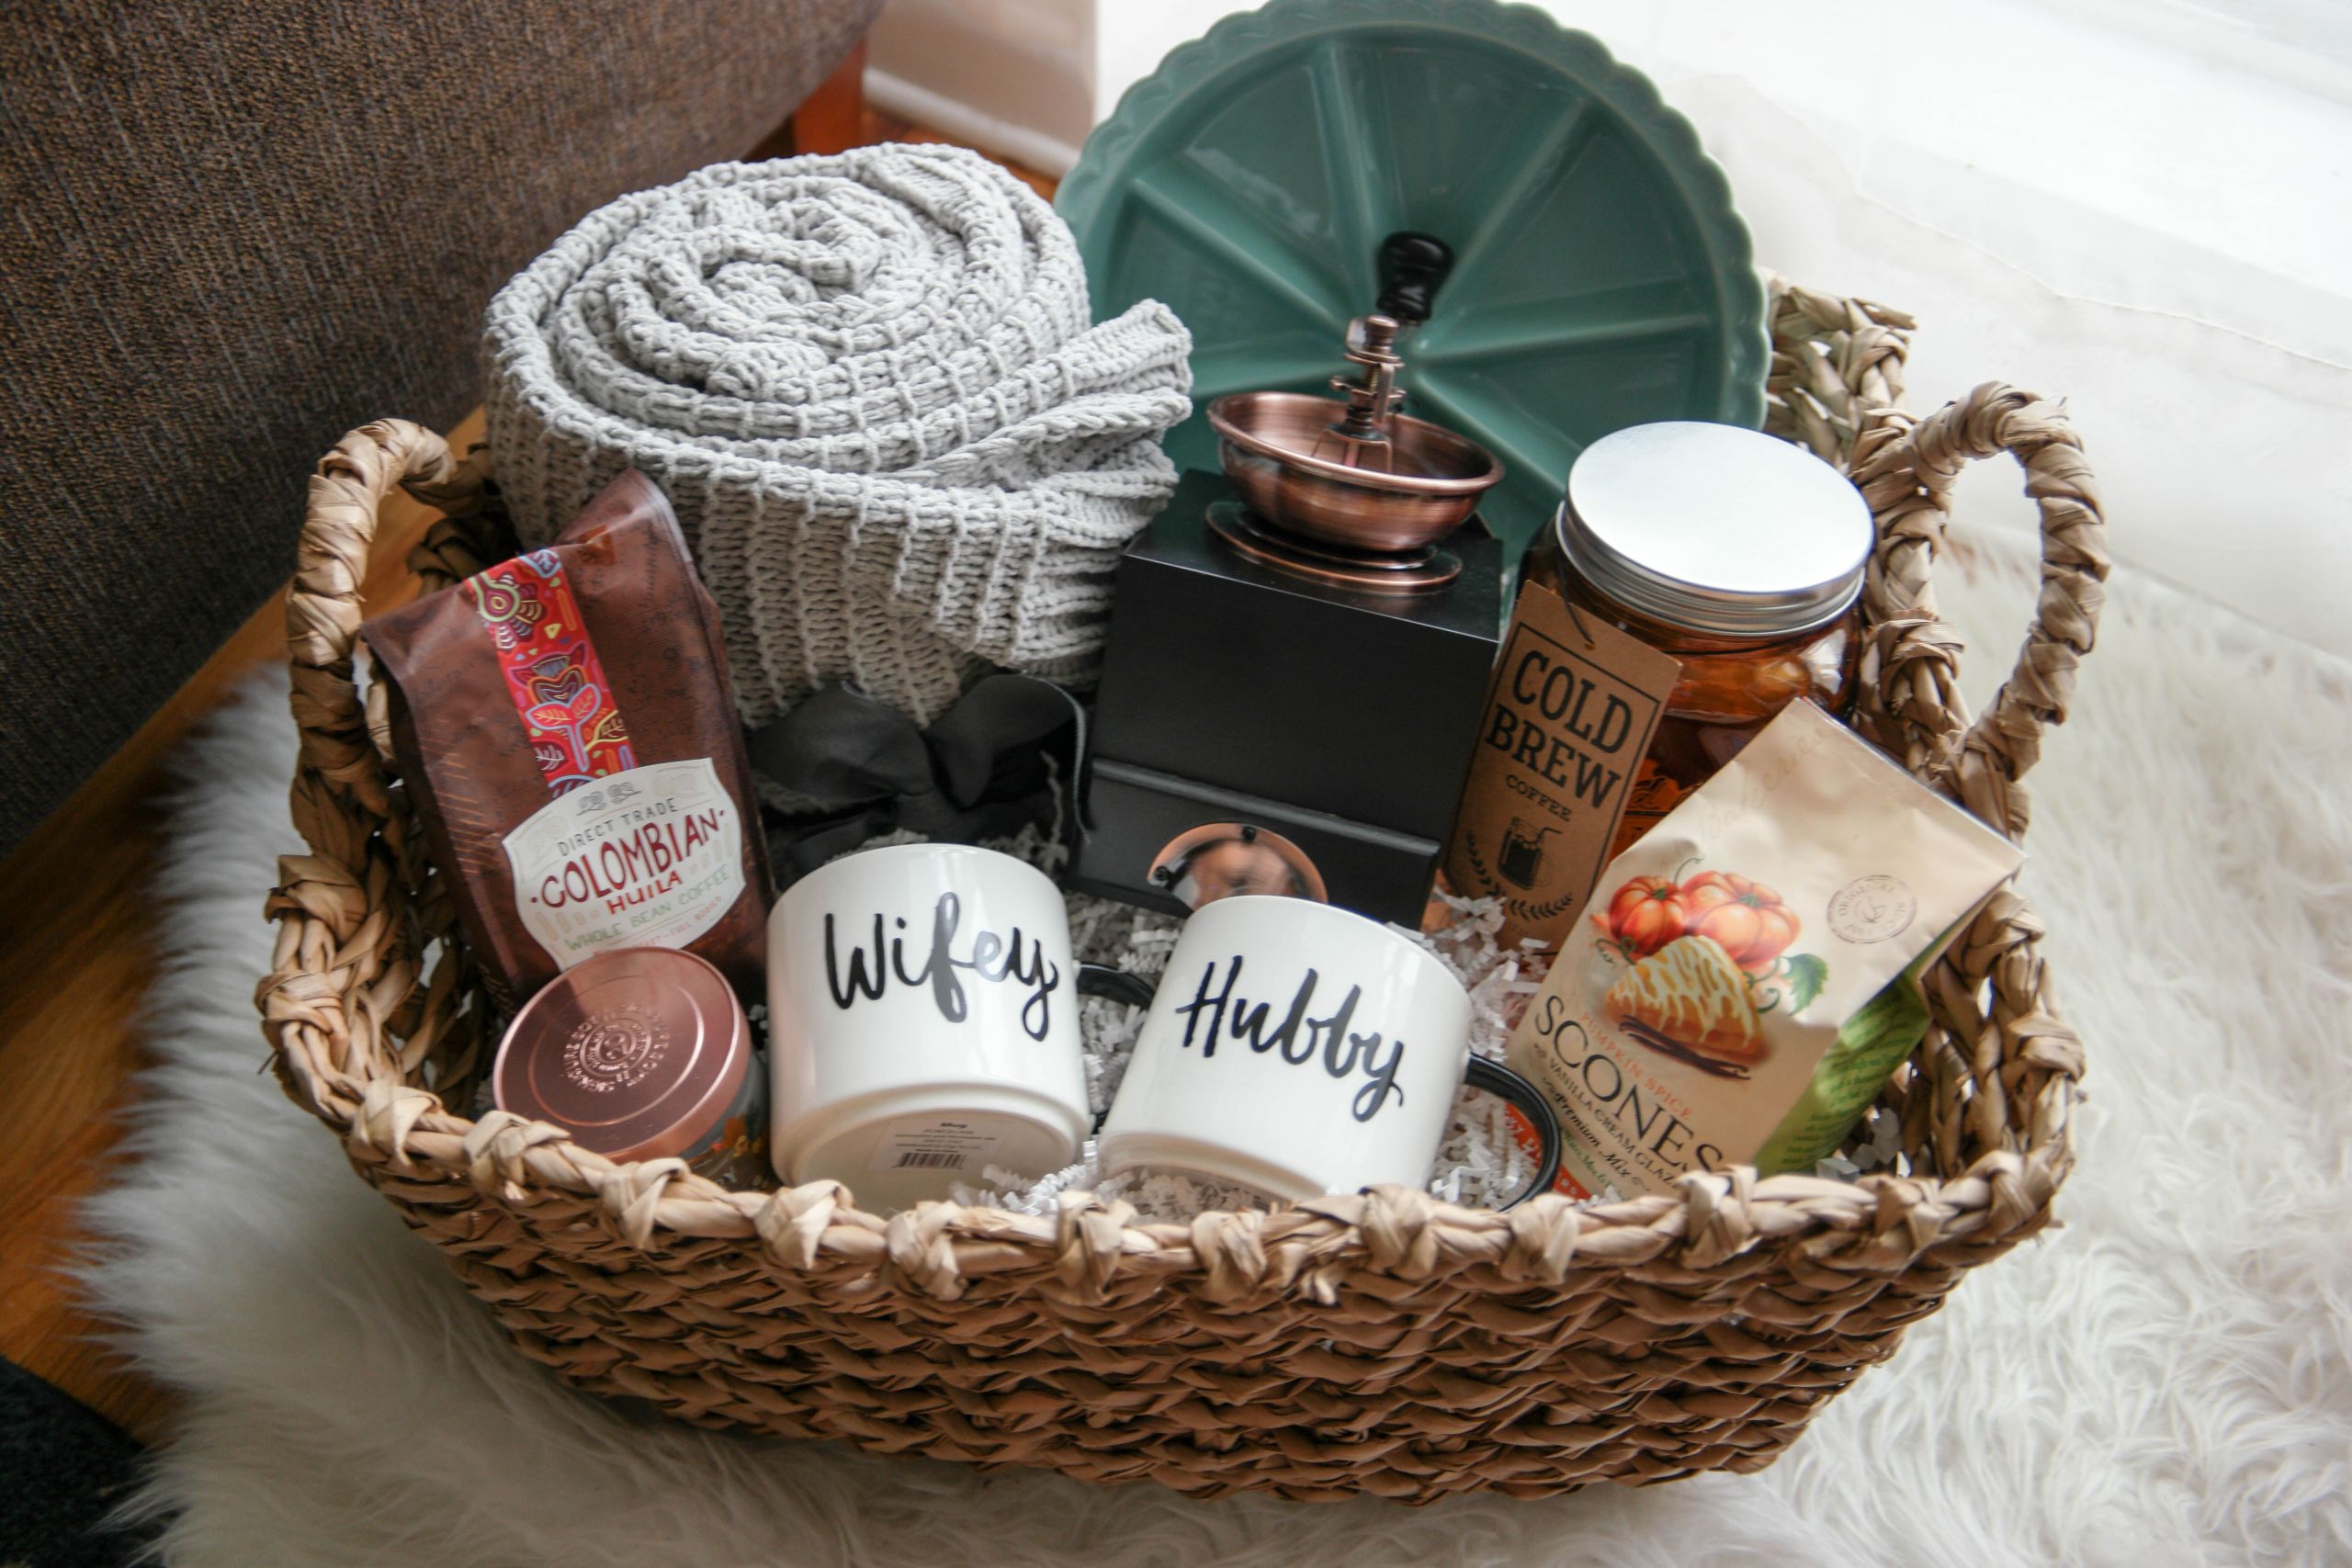 Homemade Wedding Gift Basket Ideas
 A Cozy Morning Gift Basket A Perfect Gift For Newlyweds